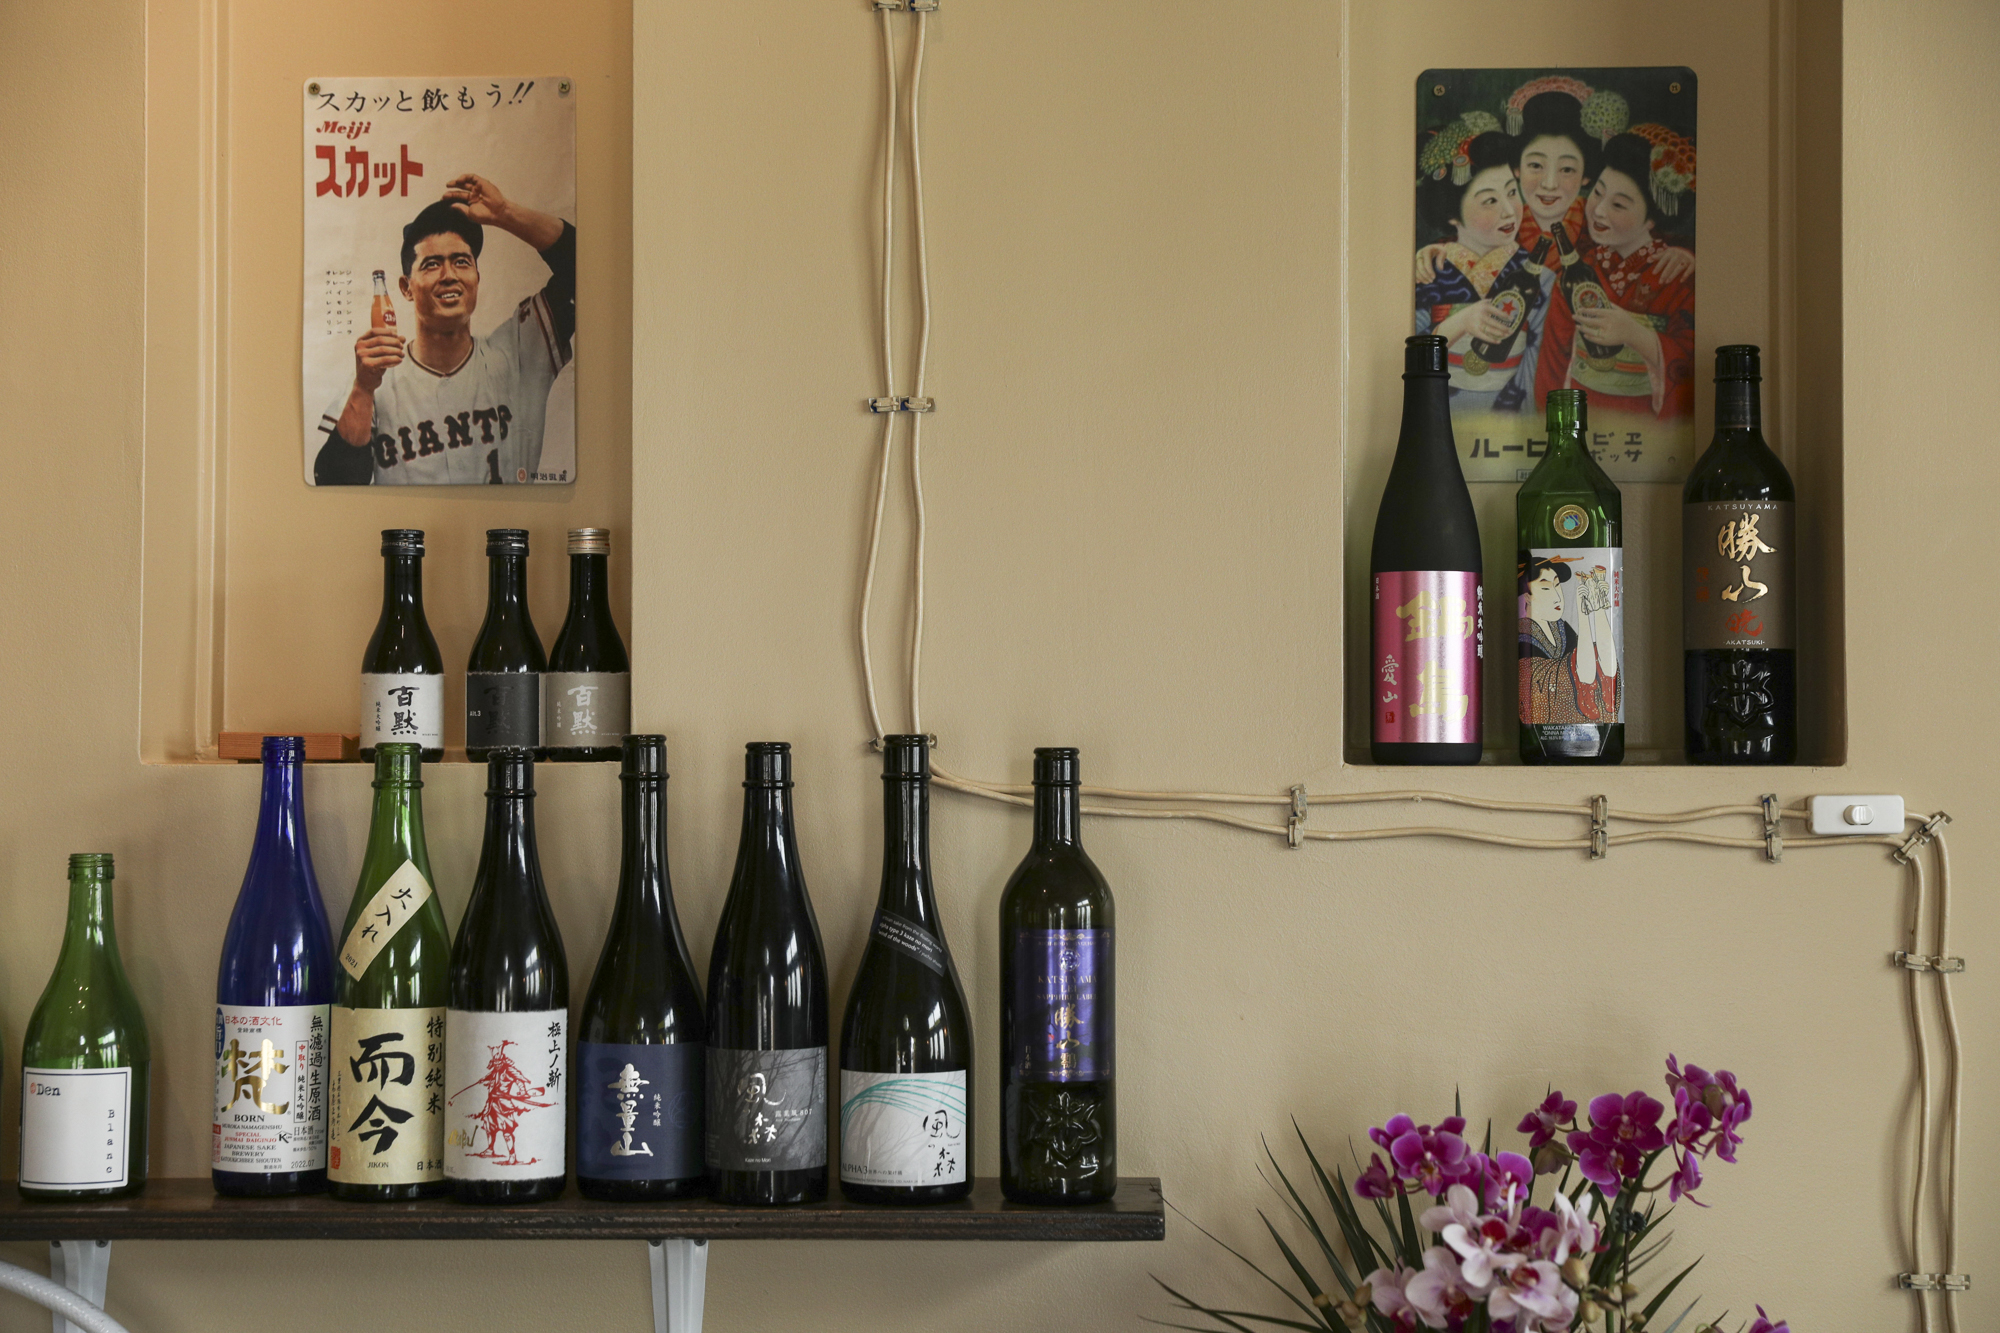 Bottles and posters sit on shelves along a wall.